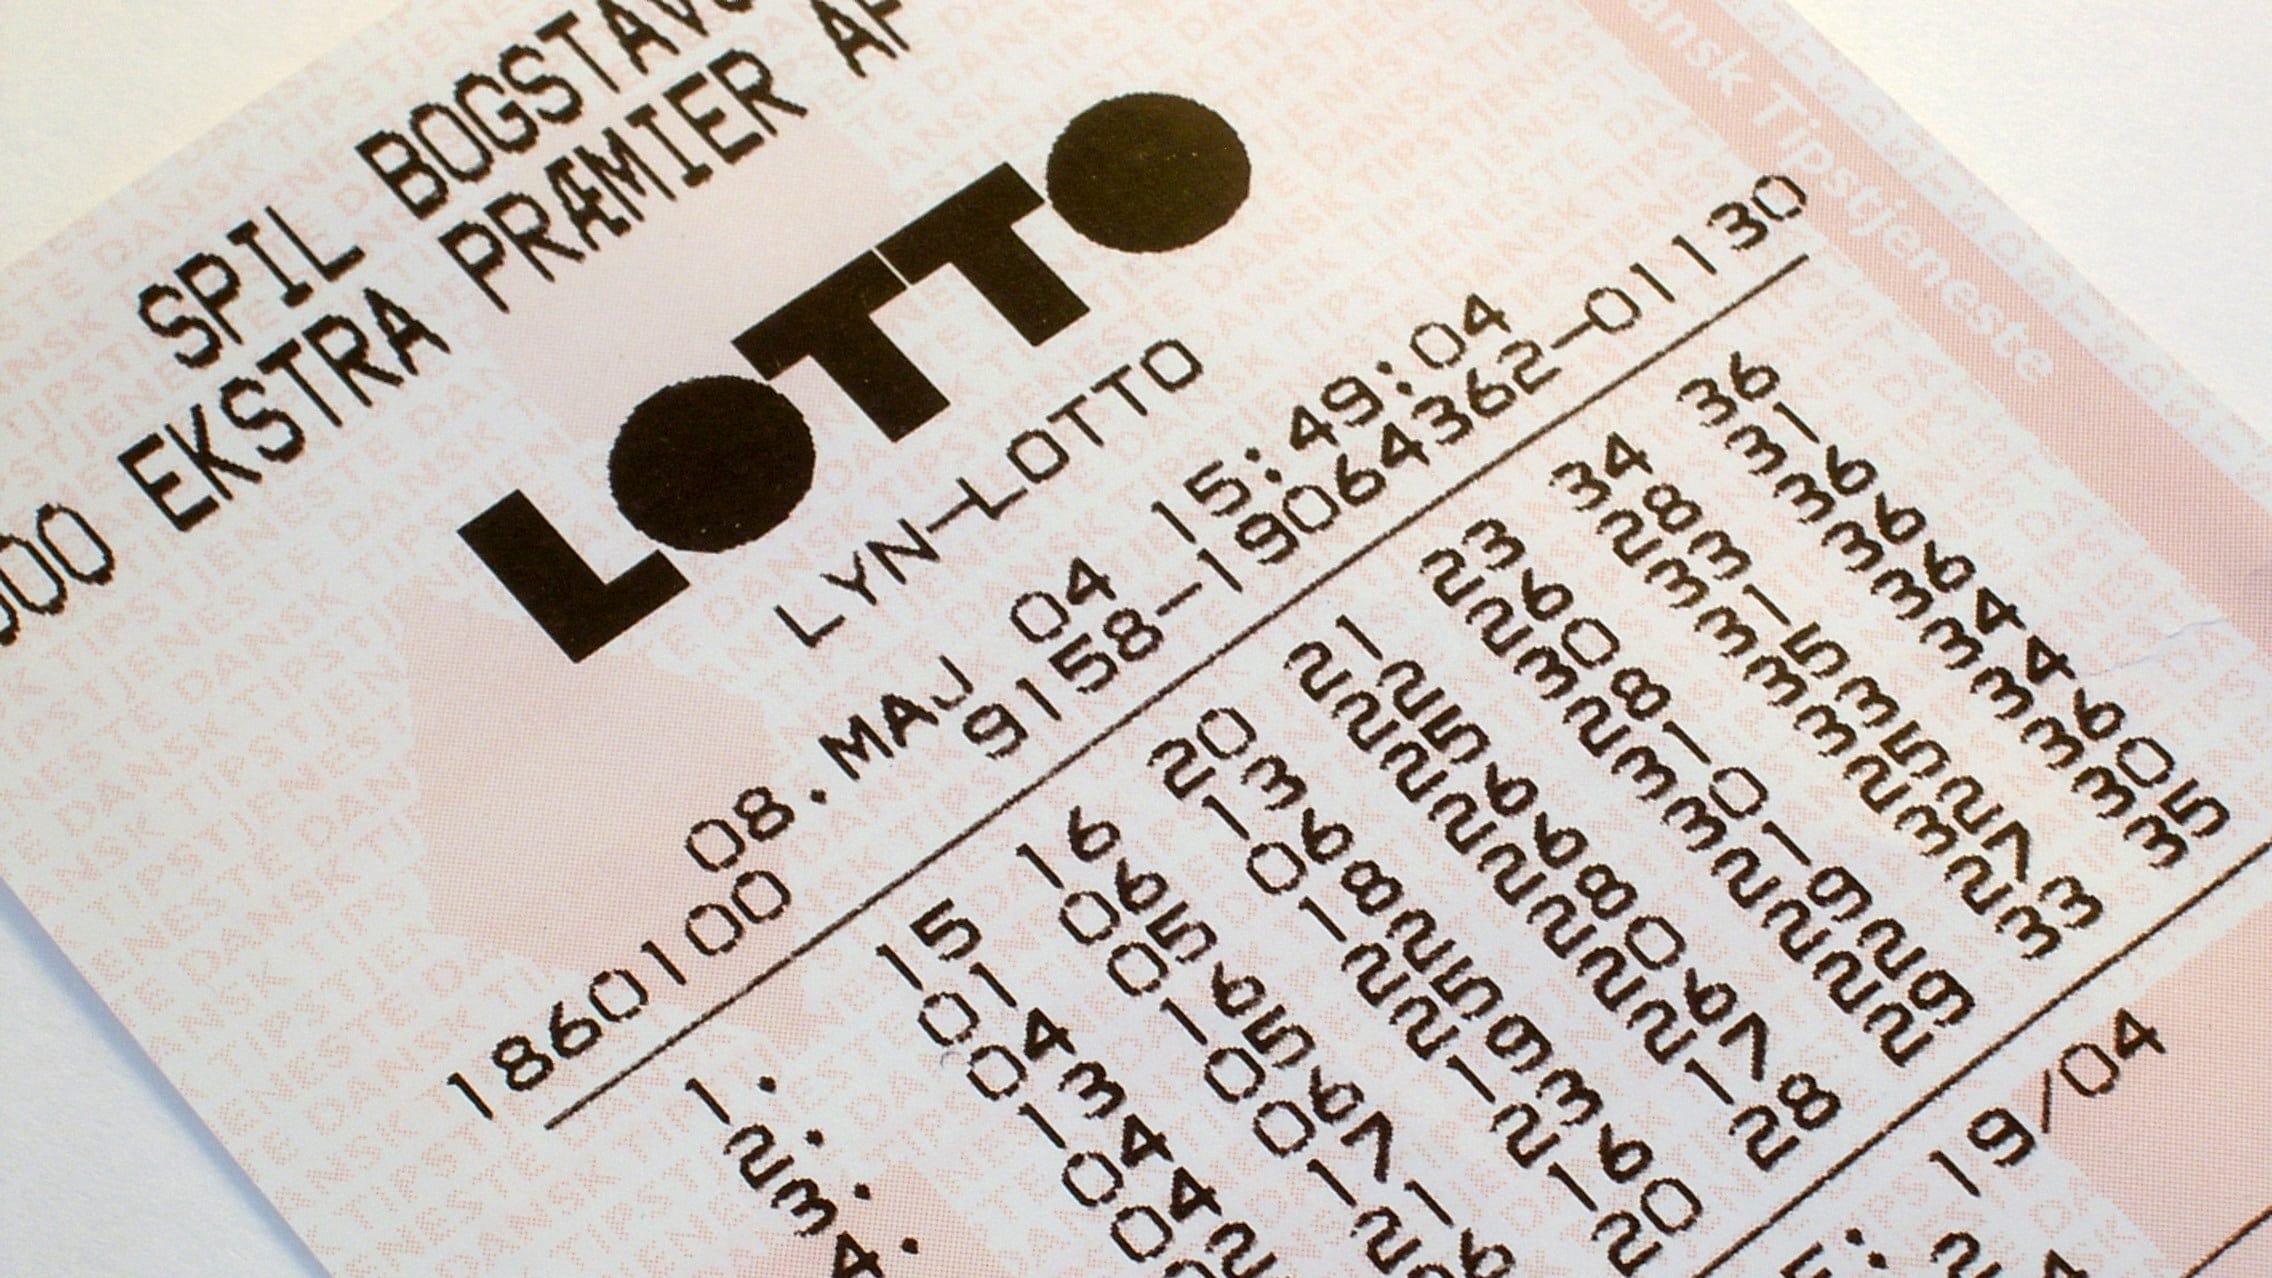 Man Wins Lottery For Sixth Time With $250,000 Jackpot Prize 